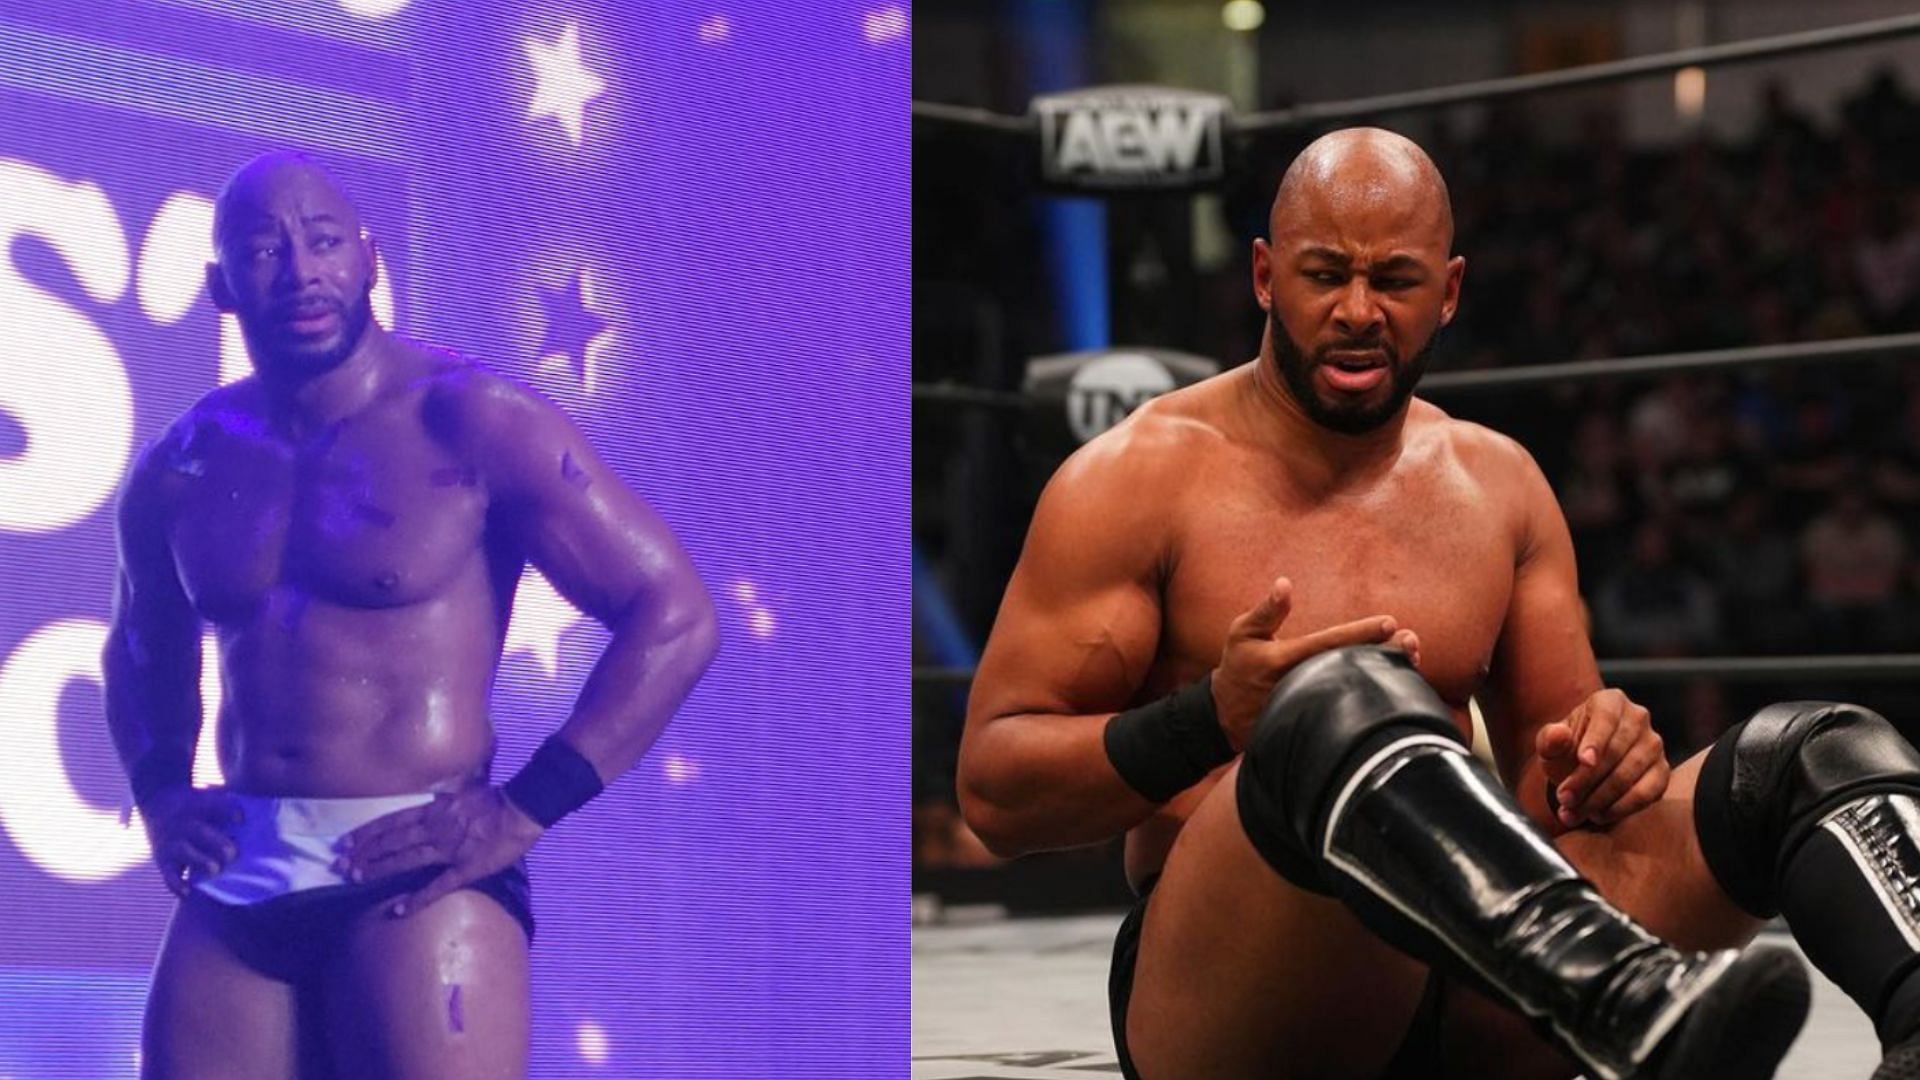 Multi-time champion Jay Lethal [Cover image via Lethal